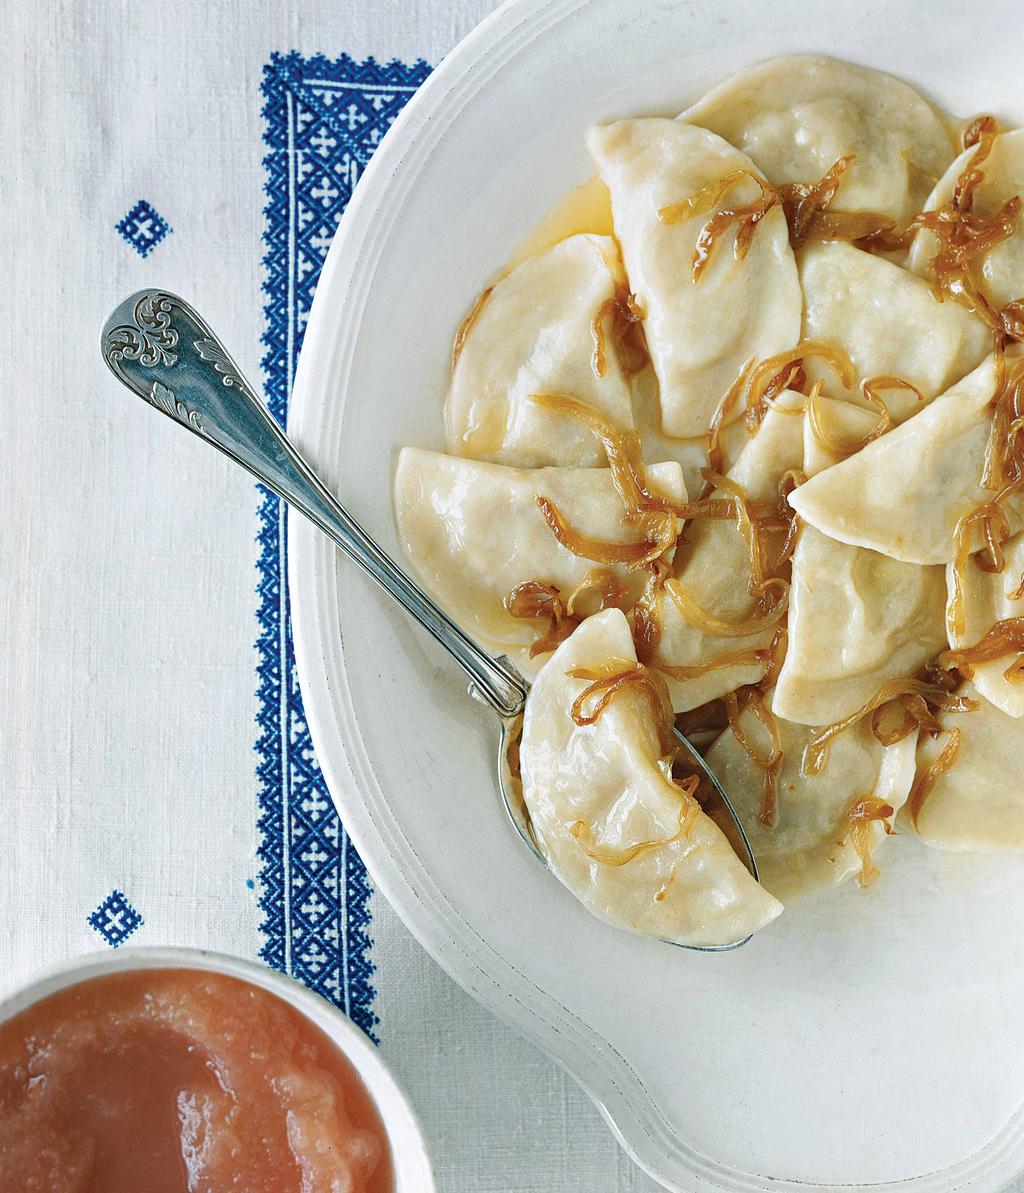 PIEROGI Half-moon-shaped dumplings exist under many names in central and eastern Europe.